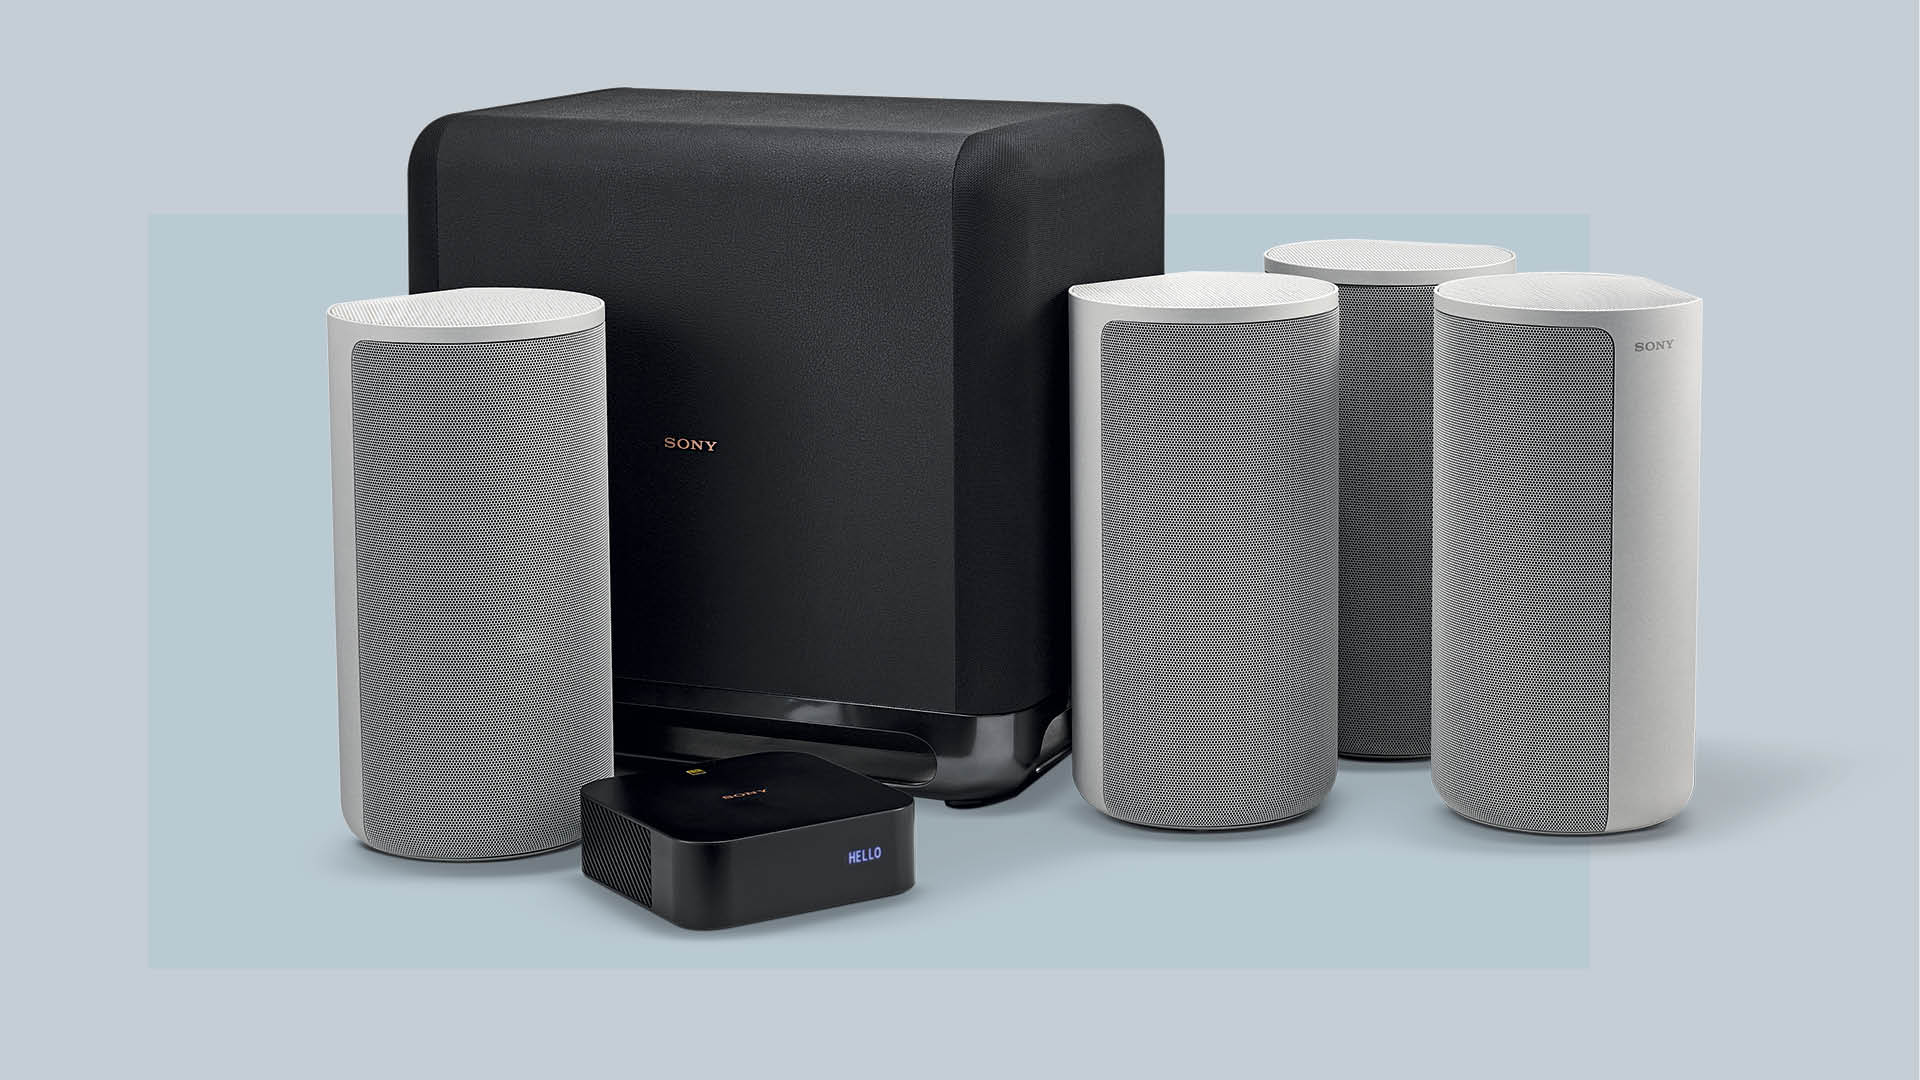 Best surround sound systems 2023: speakers and for immersive home audio | What Hi-Fi?